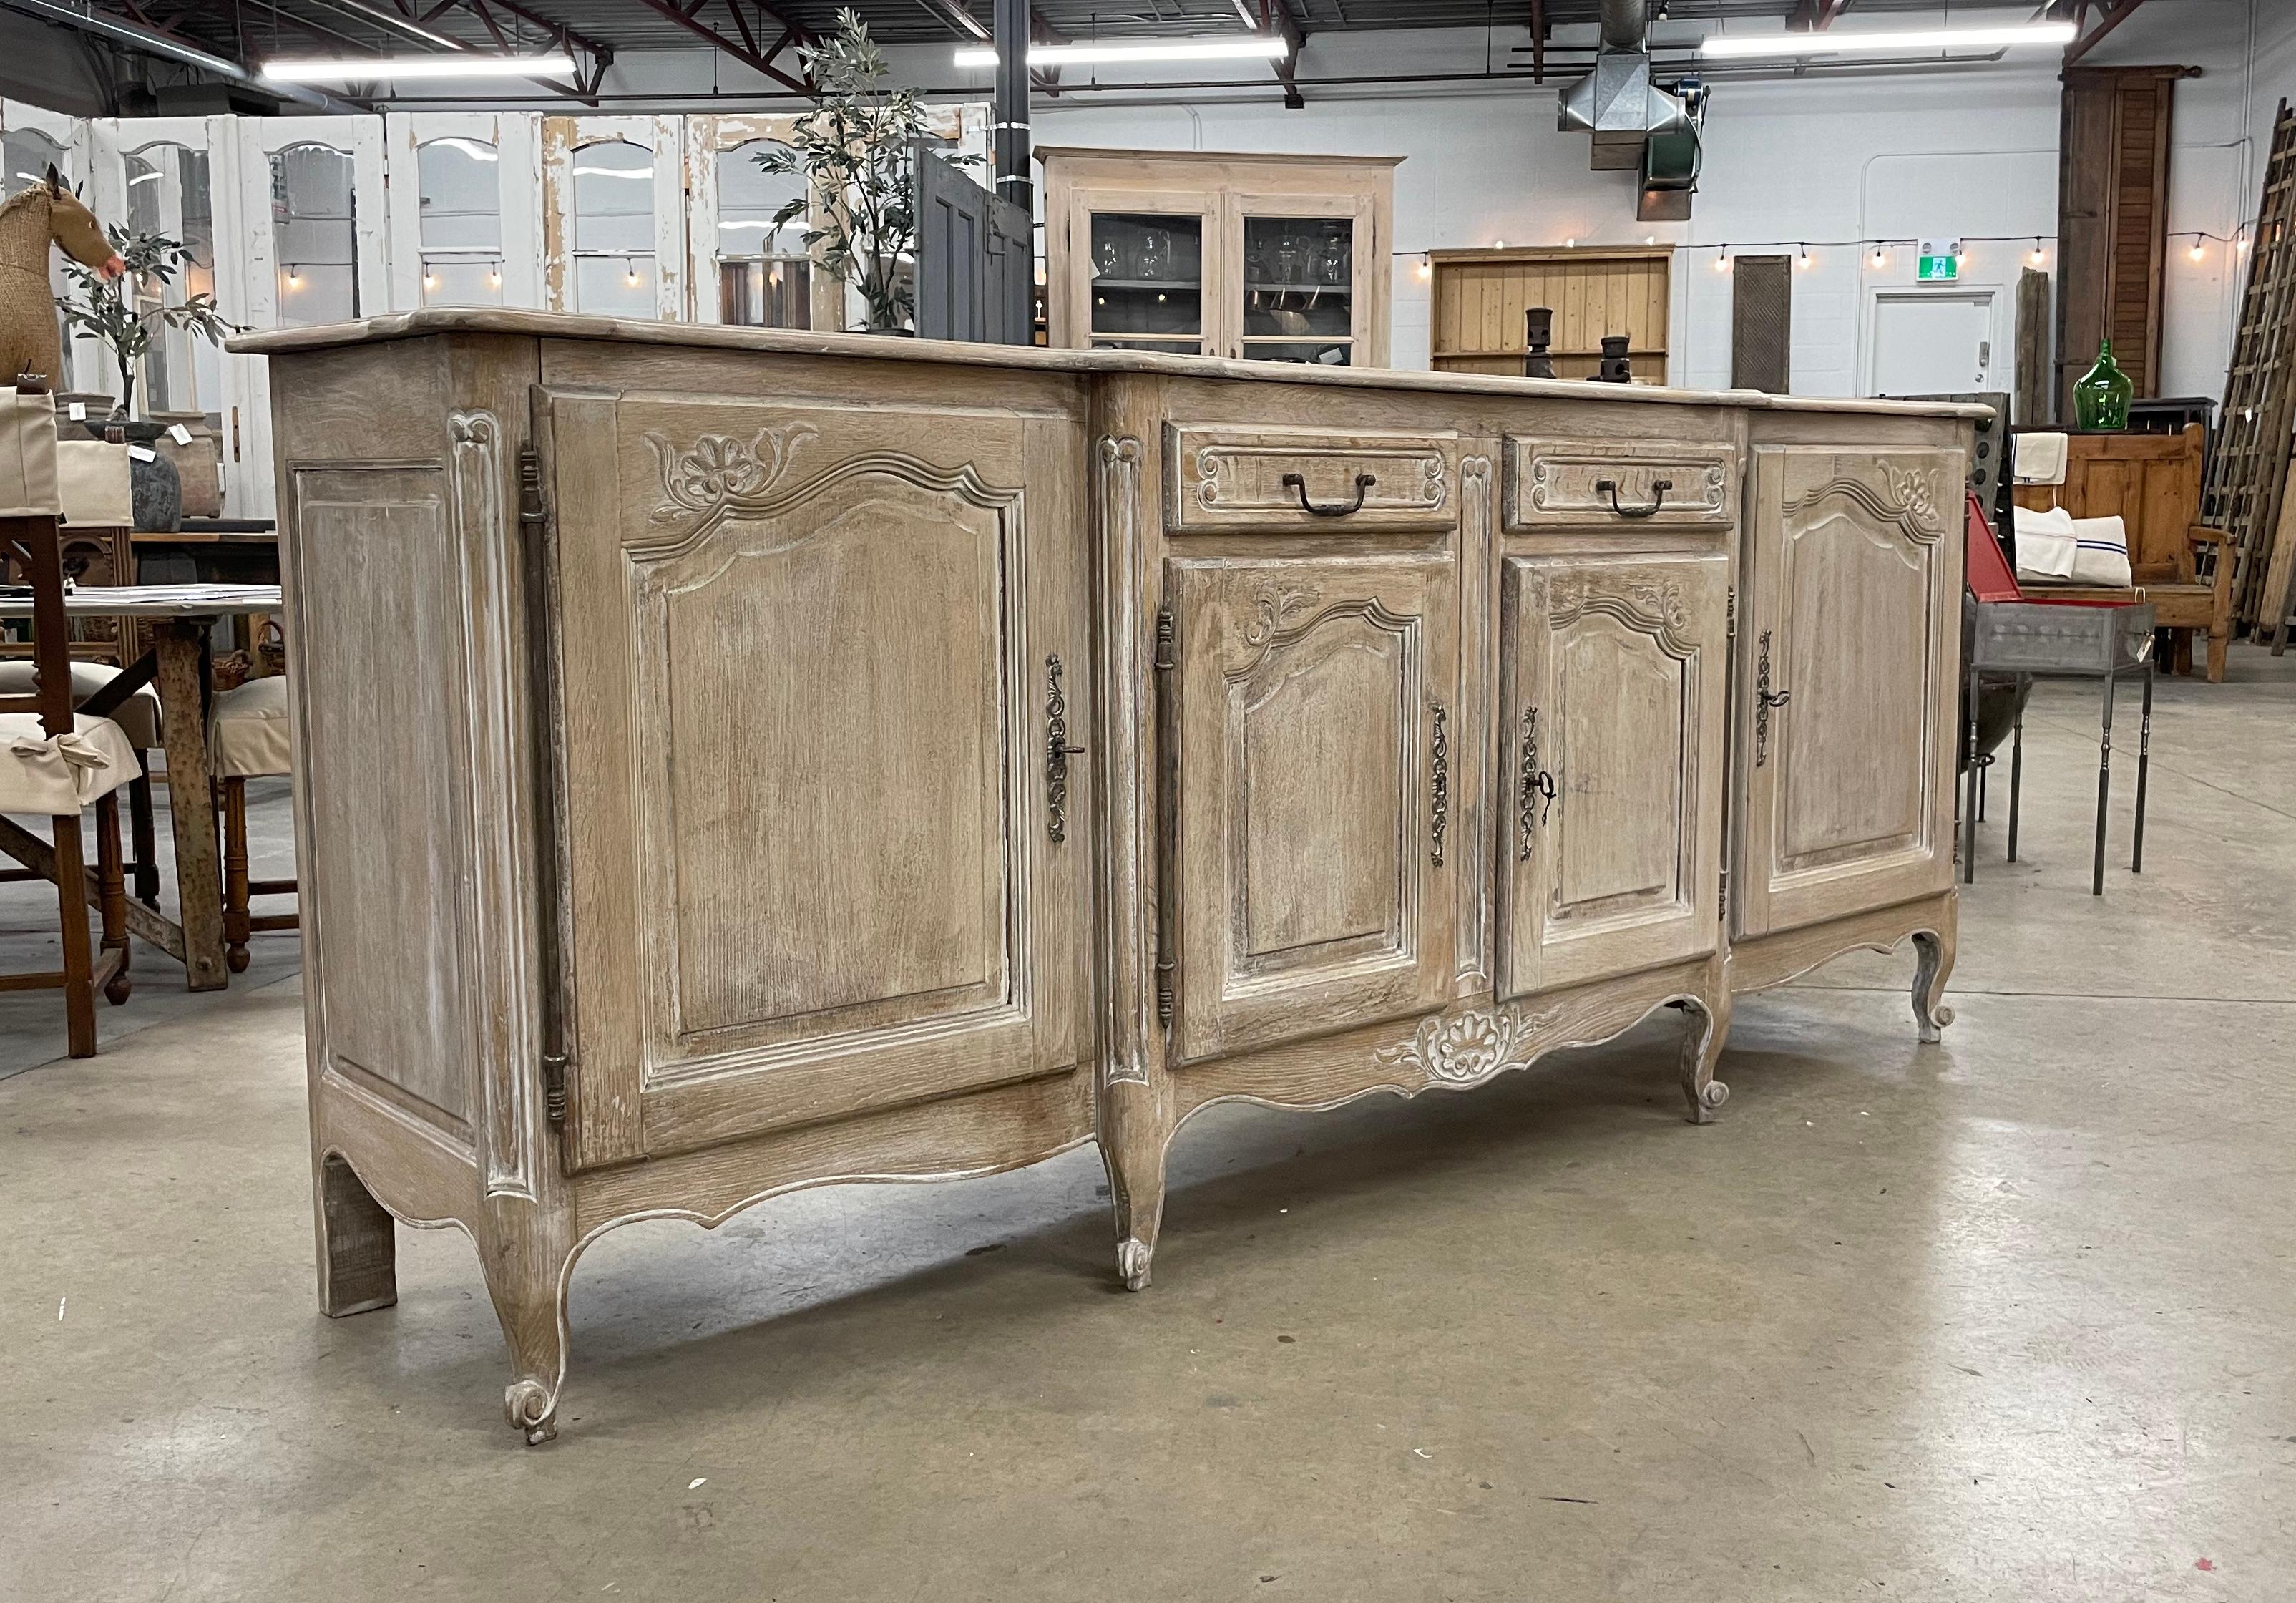 Substantial antique bleached and limed oak breakfront Louis XVI style enfilade with 4 doors and 2 drawers. Exceptional quality with parquetry top, beautiful hand wrought iron escutcheons, snail feet, and scalloped bottom apron.